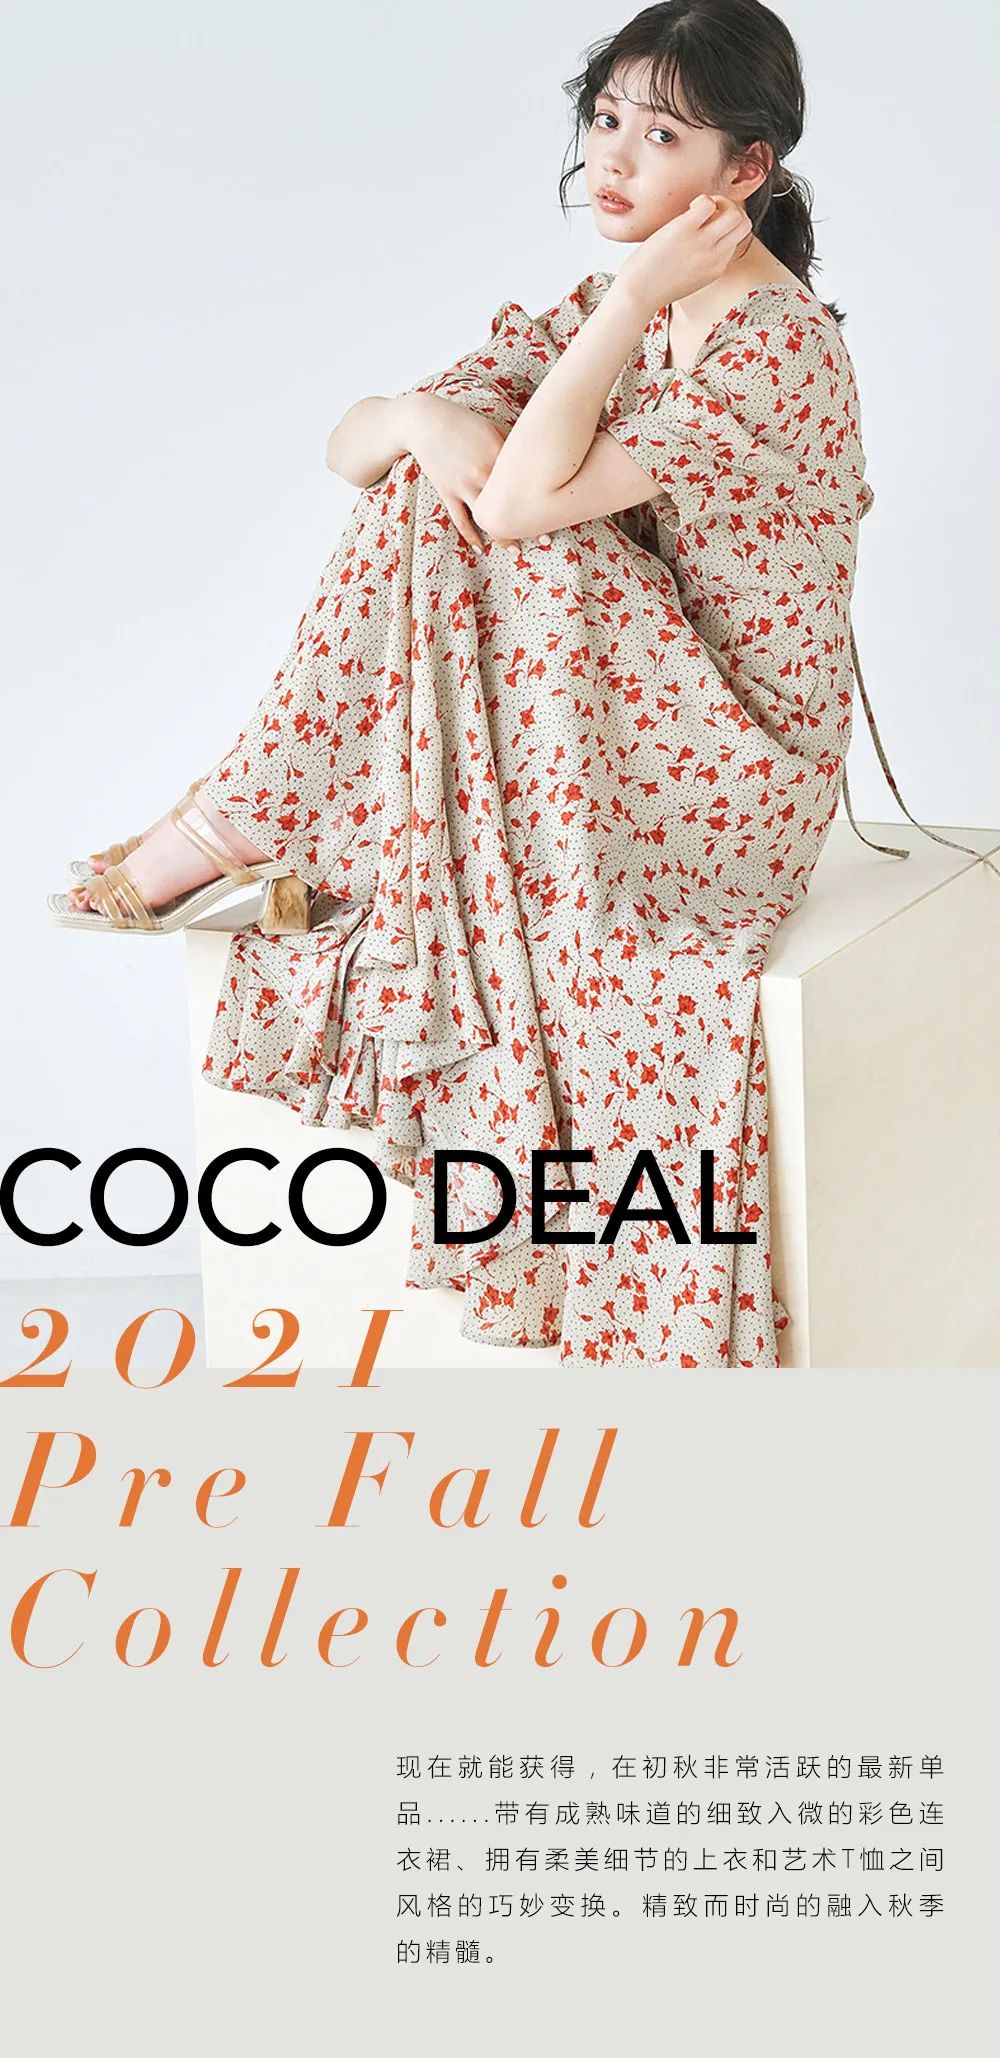 COCODEAL,COCO DEAL-2021 Pre Fall Collection - COCODEAL官方旗舰店